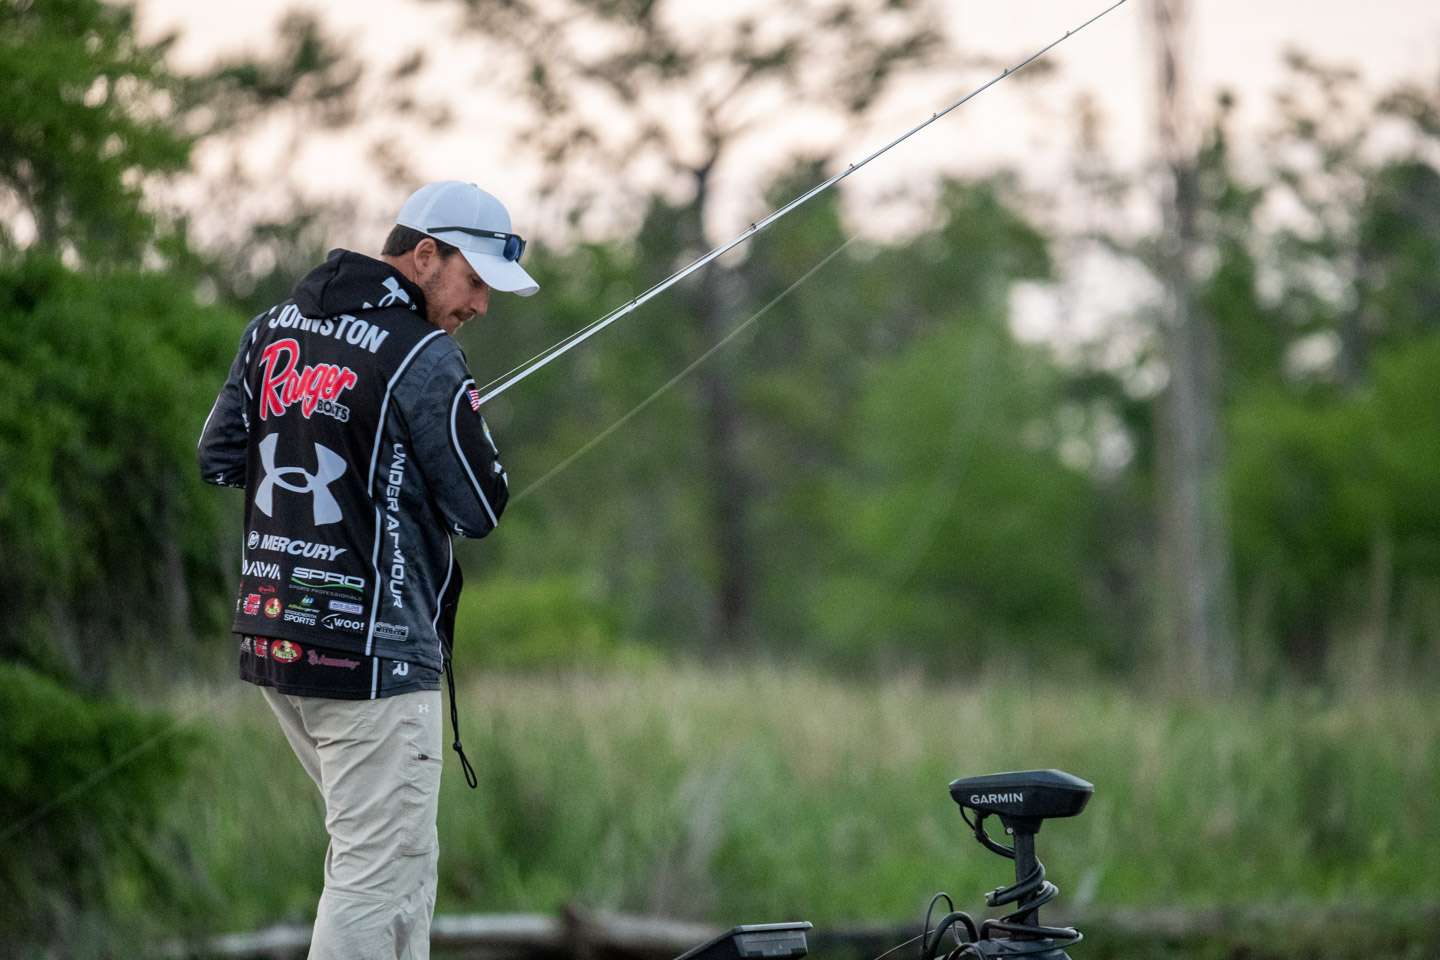 Take a look at Chris Johnston's challenging Championship Sunday of the Dovetail Games Bassmaster Elite at Sabine River sponsored by Bassmaster 2022 â the official video game of B.A.S.S.